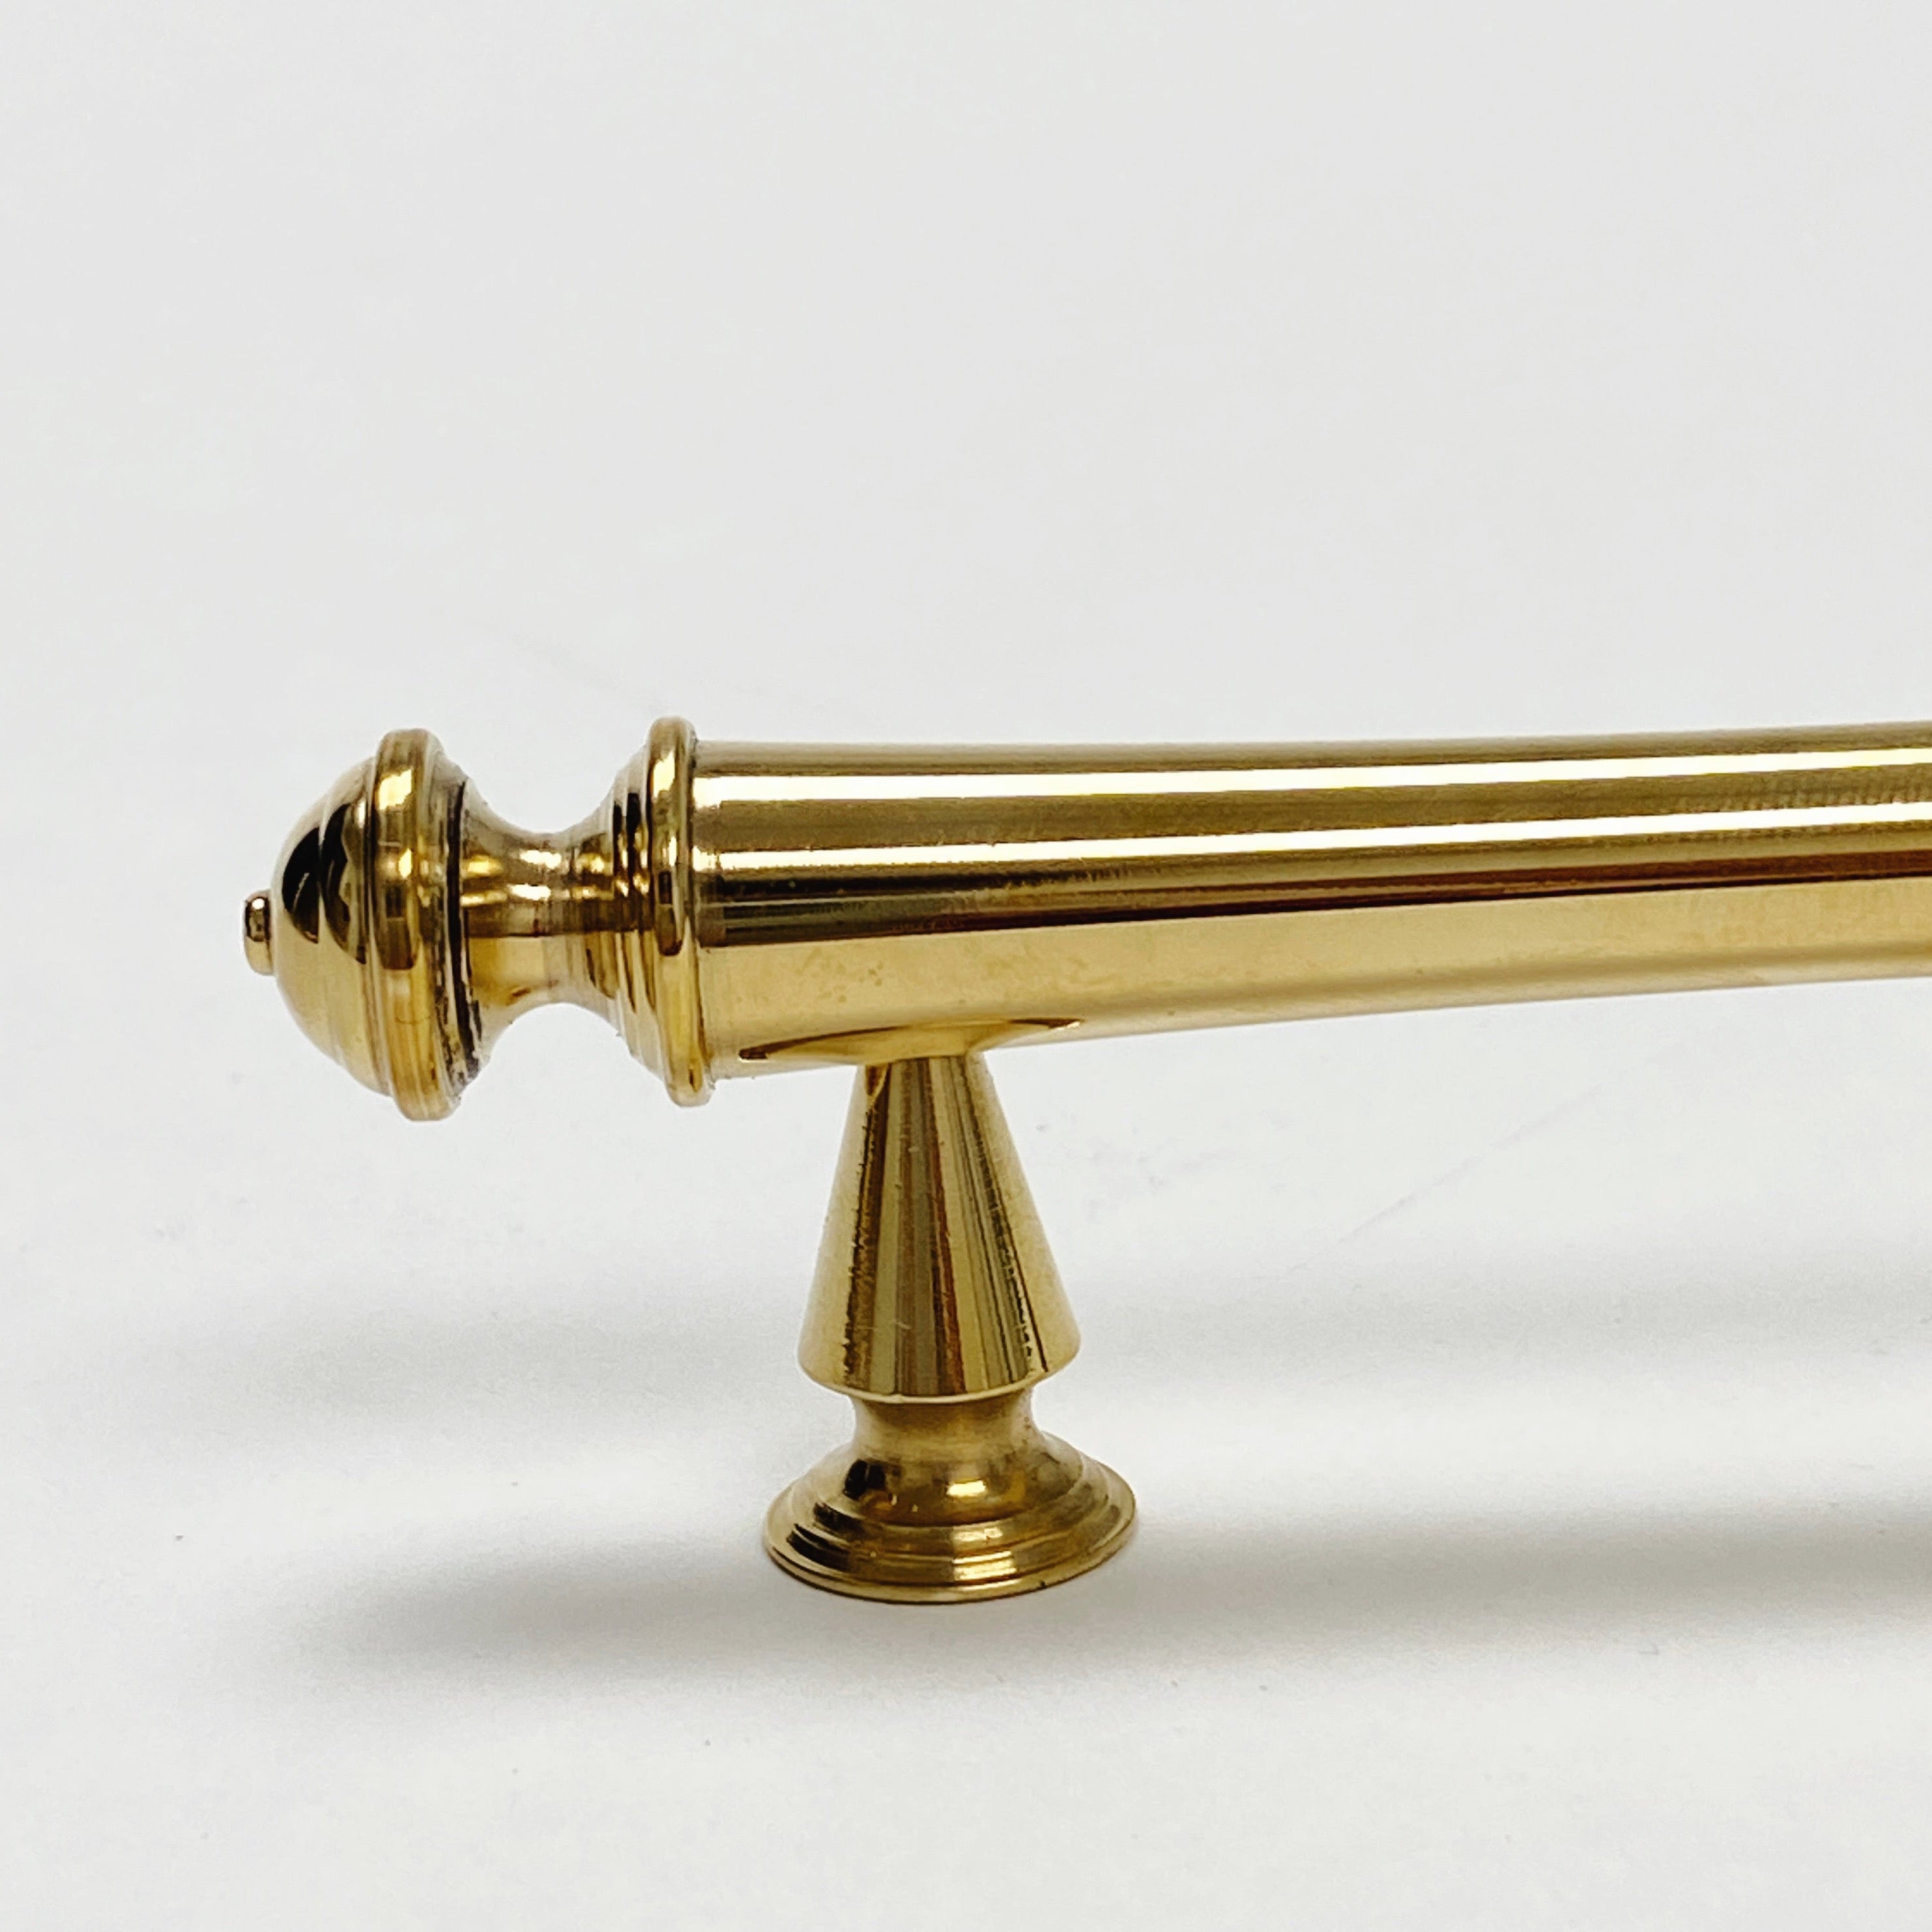 Unlacquered Brass "Emmeline" Cabinet Knobs and Drawer Pull